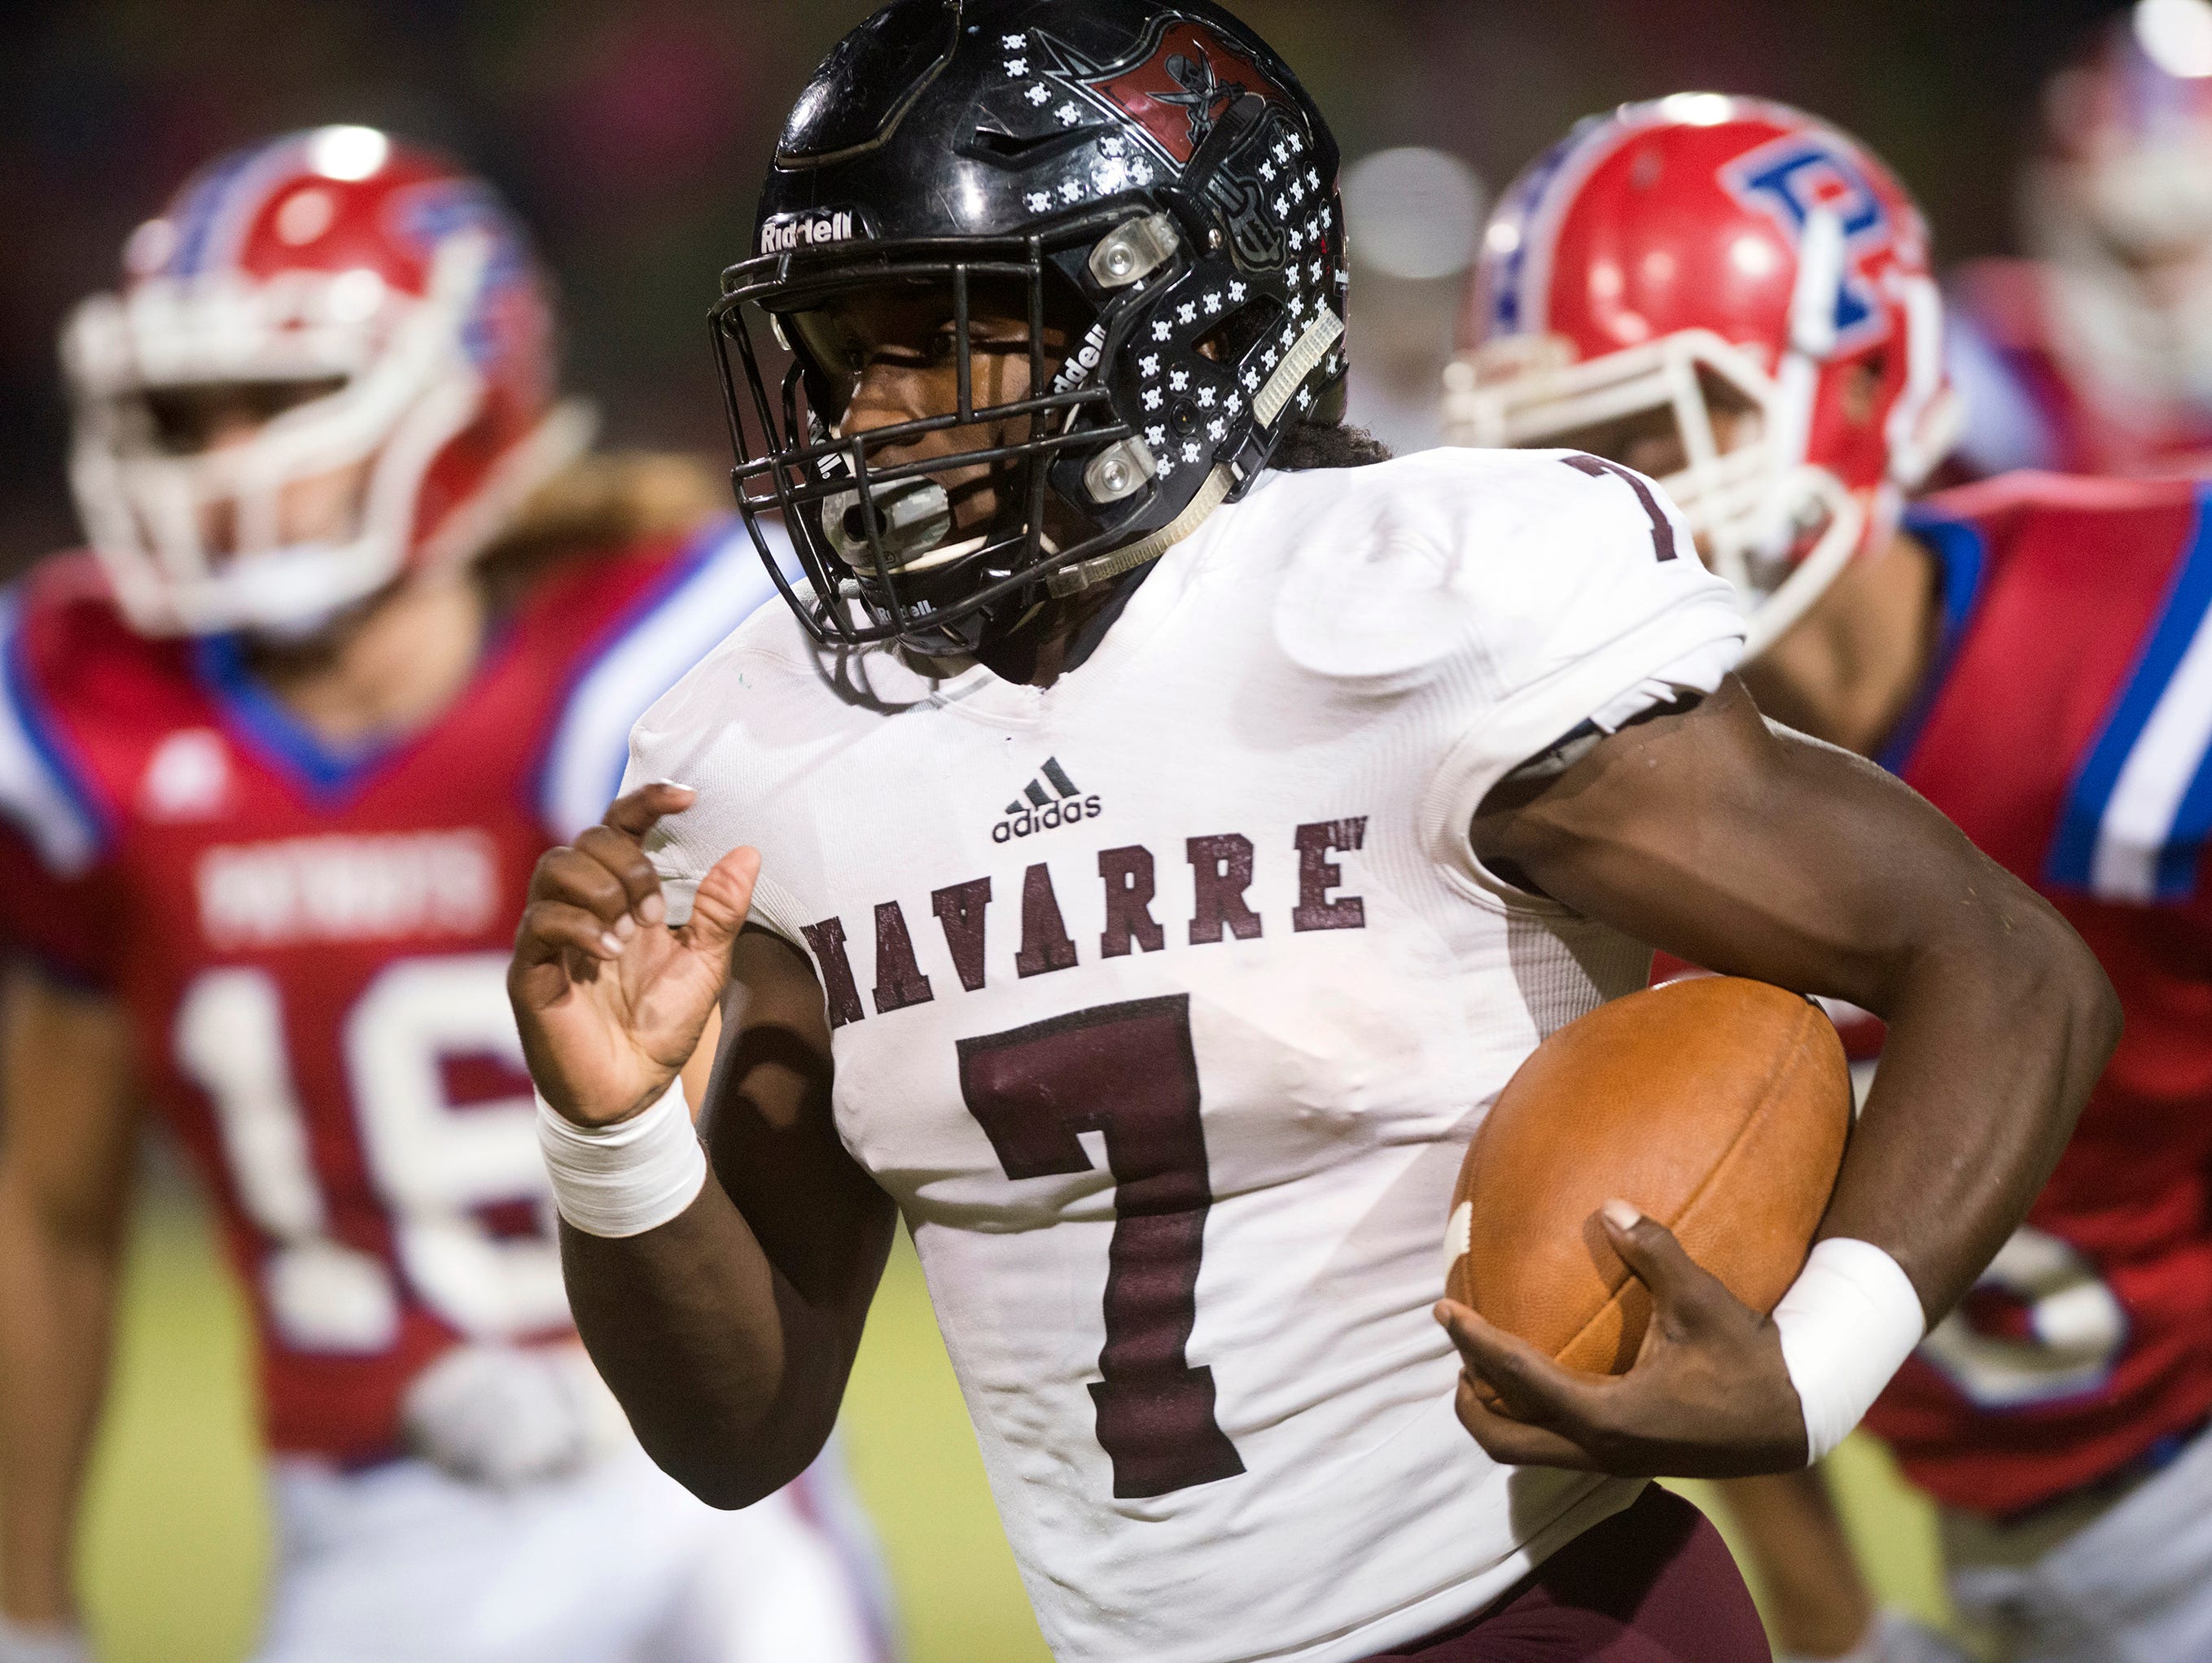 Navarre High School star running back Michael Carter (No. 7) runs for extra yards against the Pace High School defense during Friday night's District 2-6A matchup.